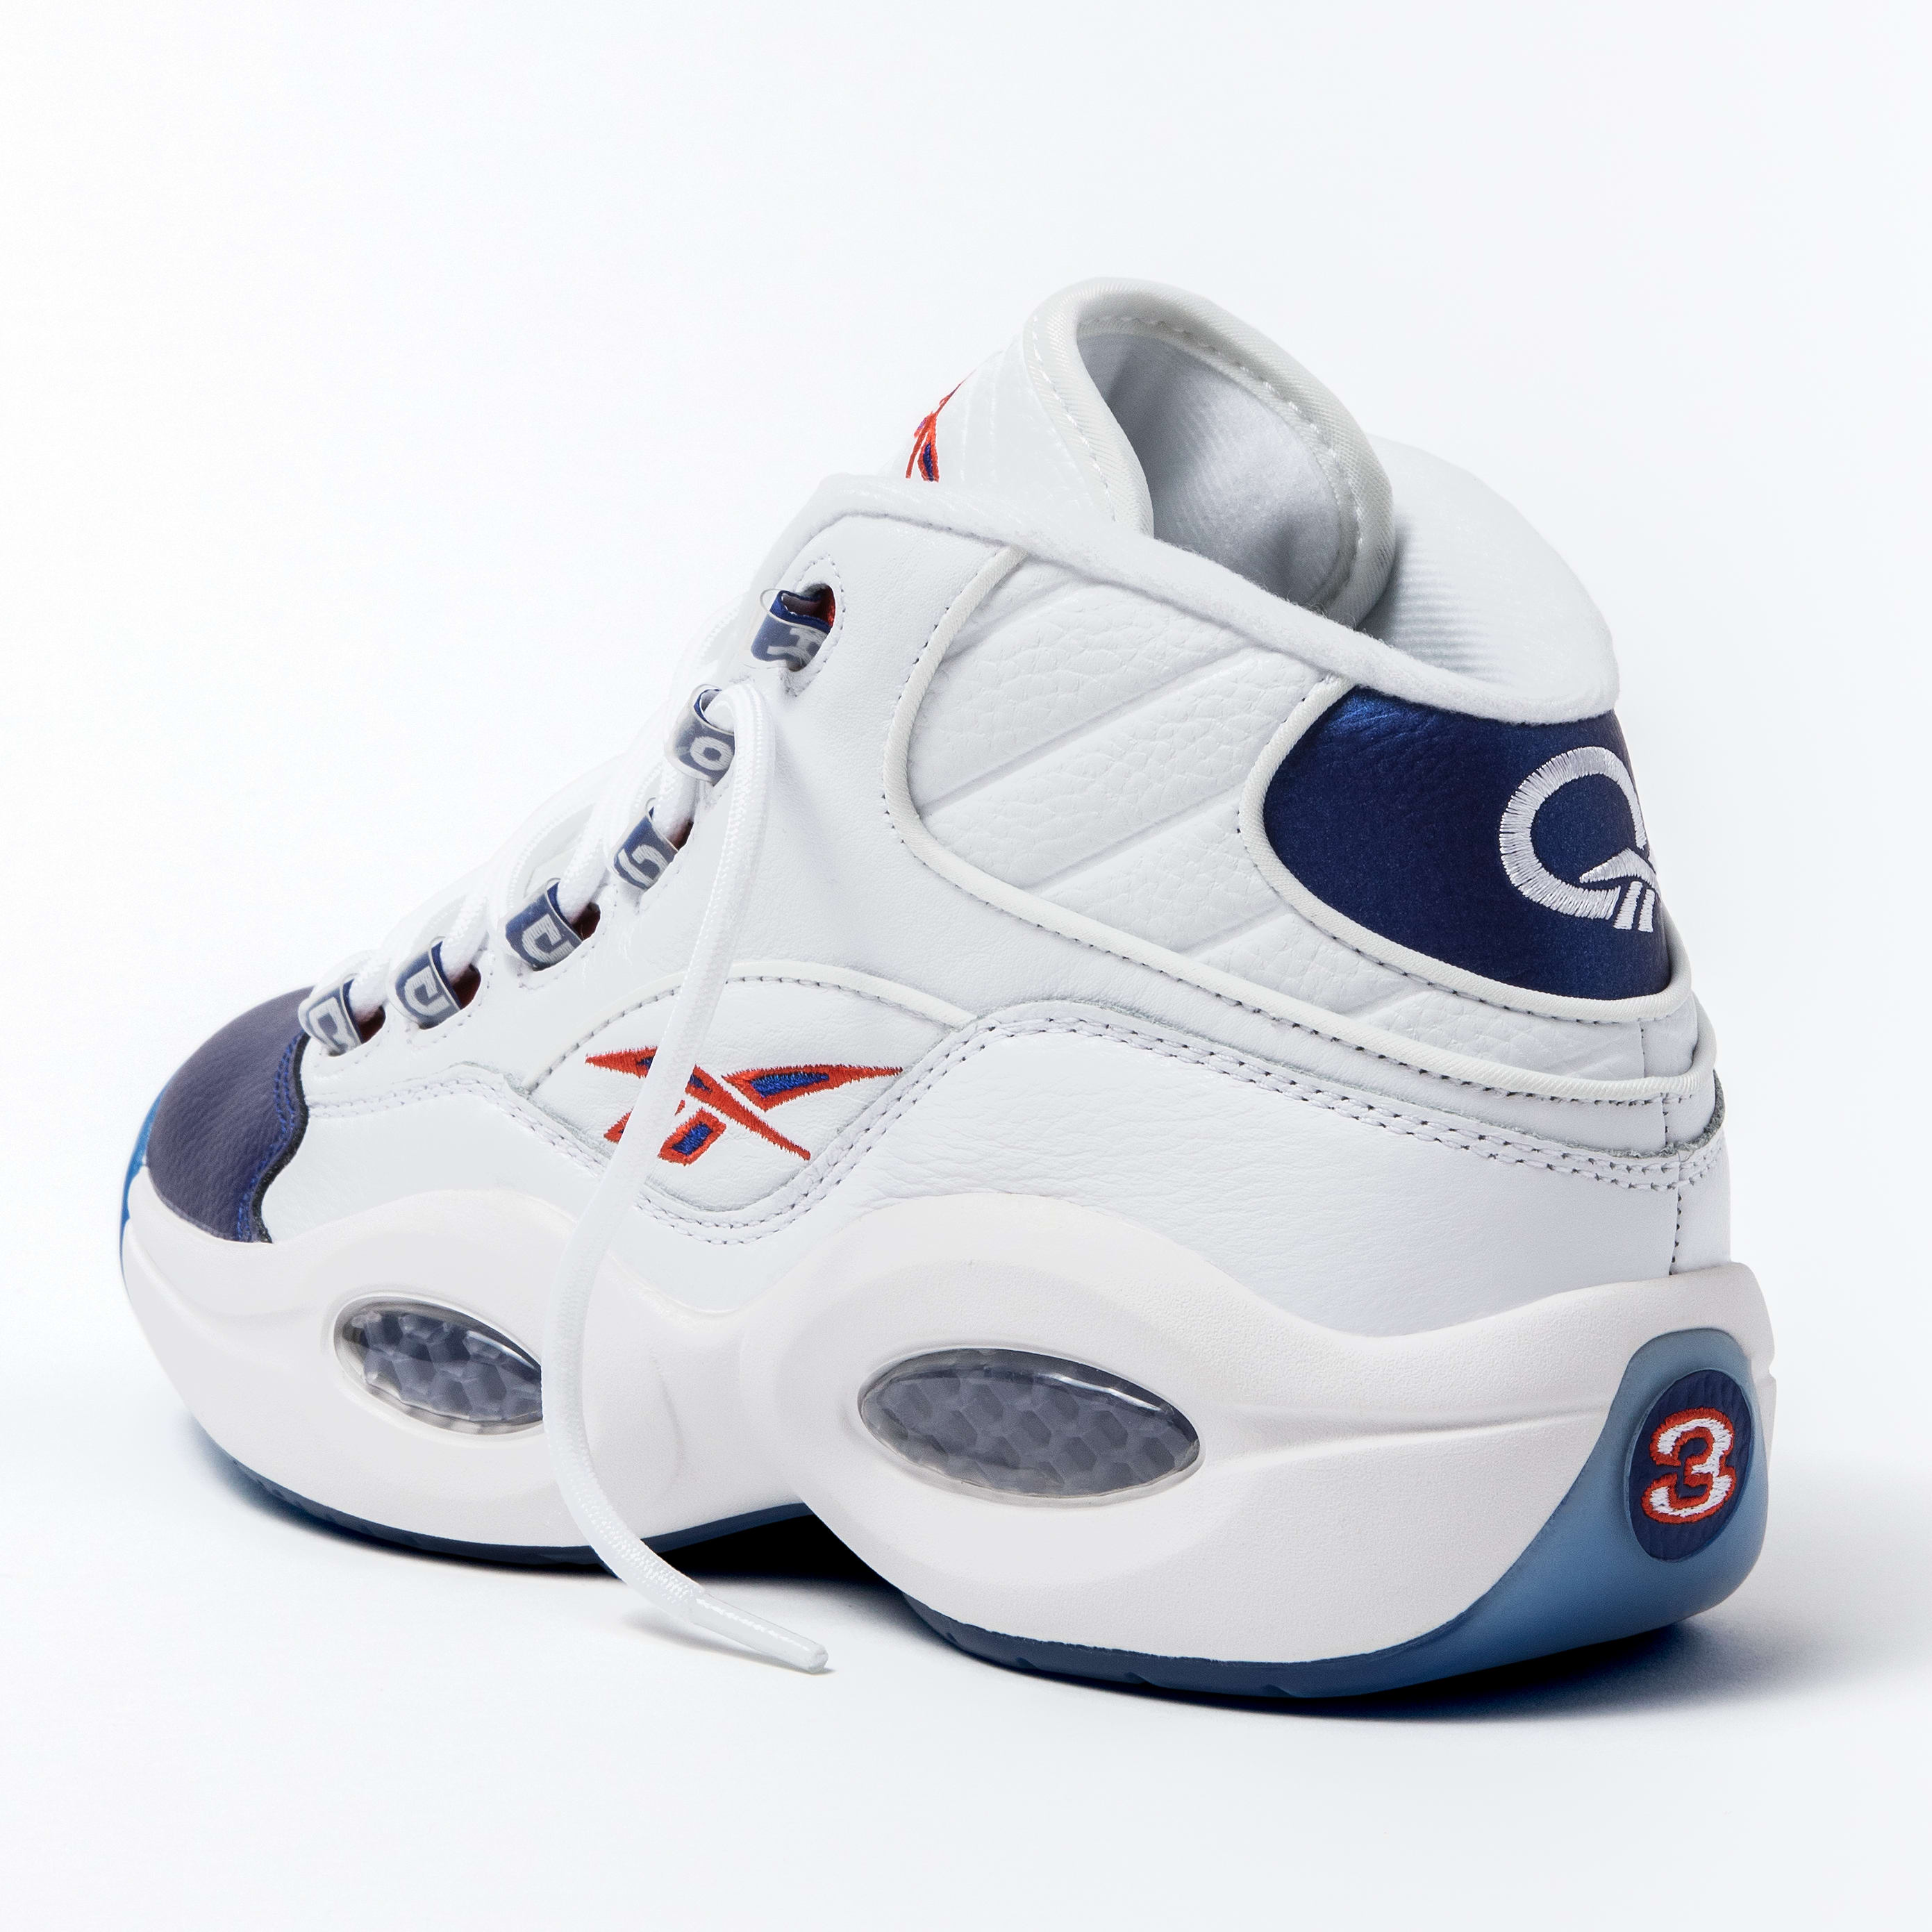 basin Warmth Costume Blue Toe' Reebok Question Mids Available Early | Complex